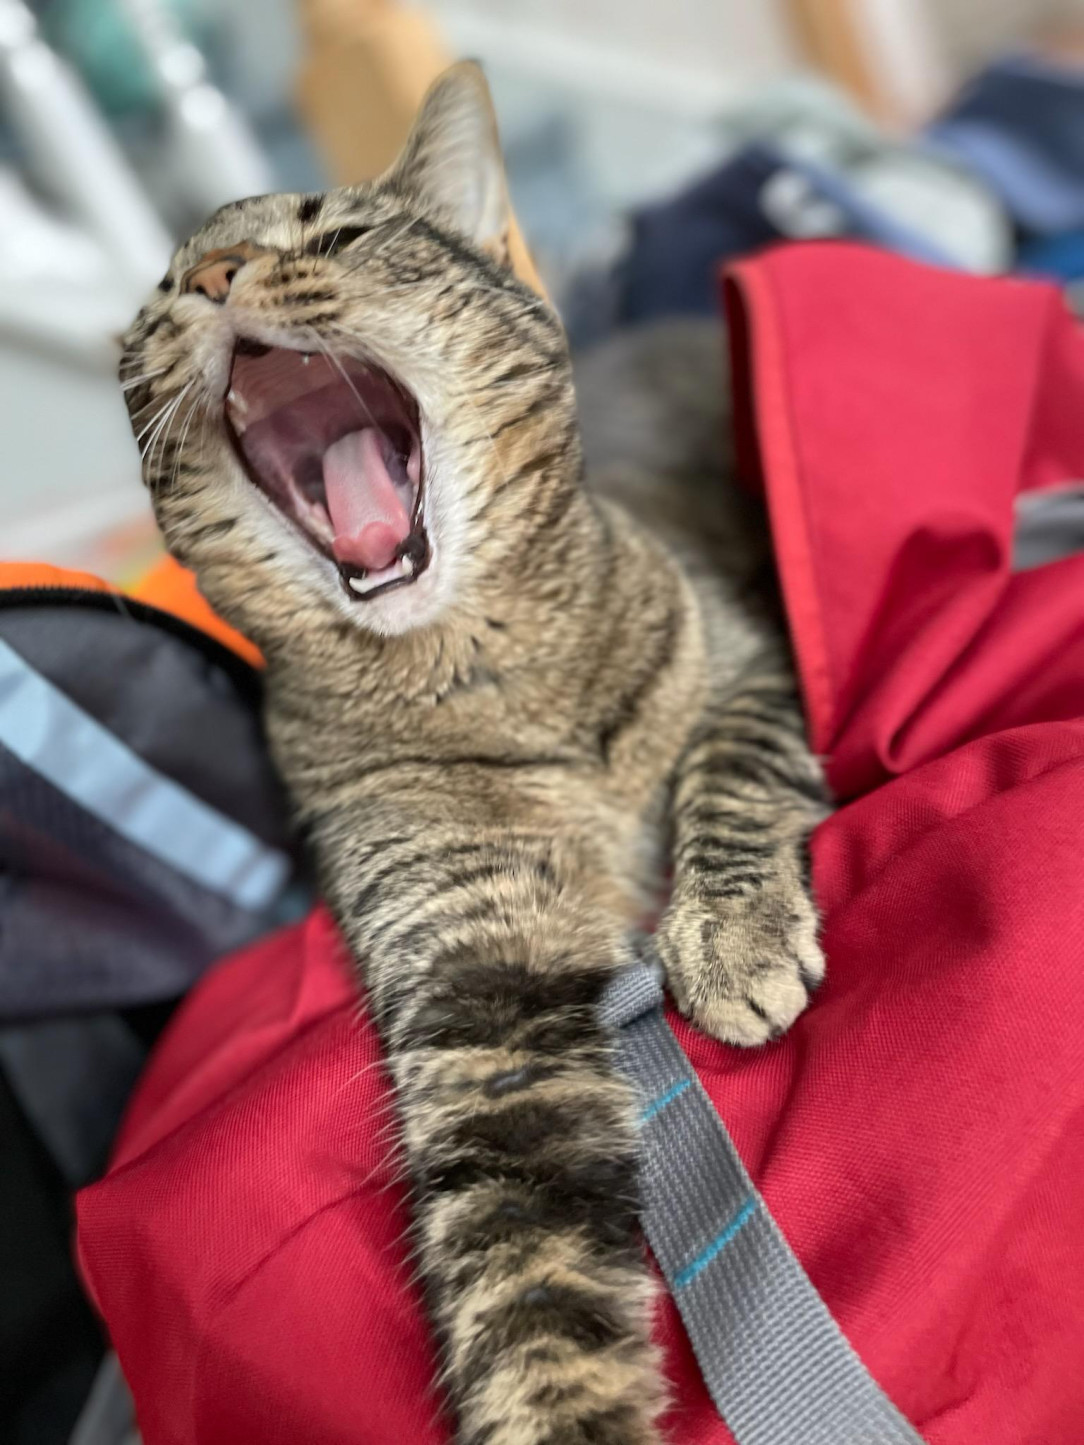 A lioness emerges from her duffel bag with a mighty roar